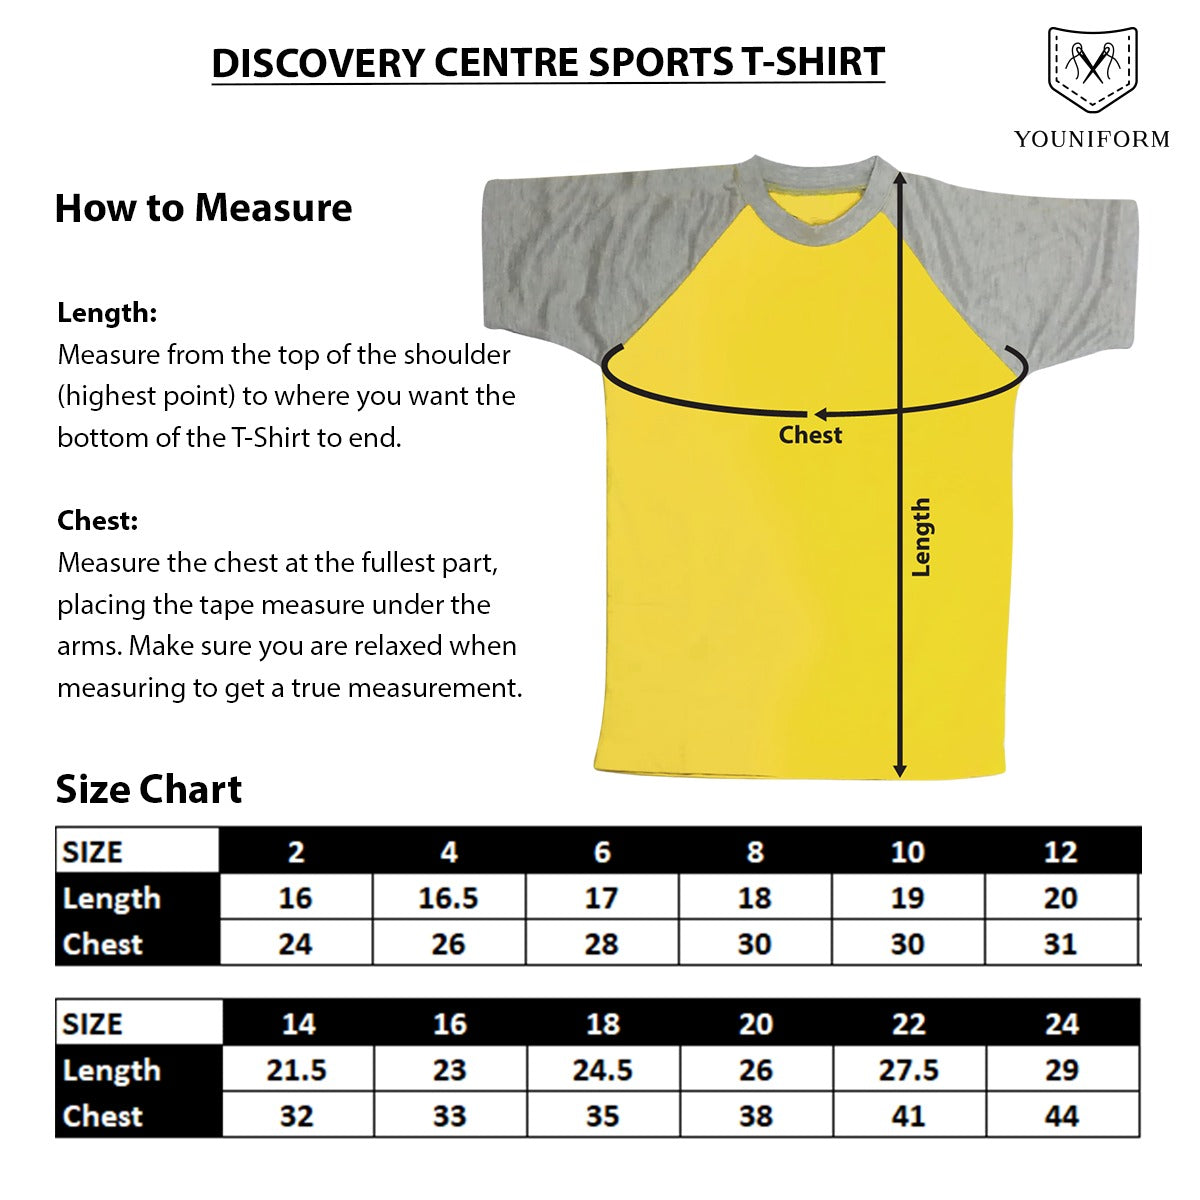 Discovery Centre Sports T-shirt